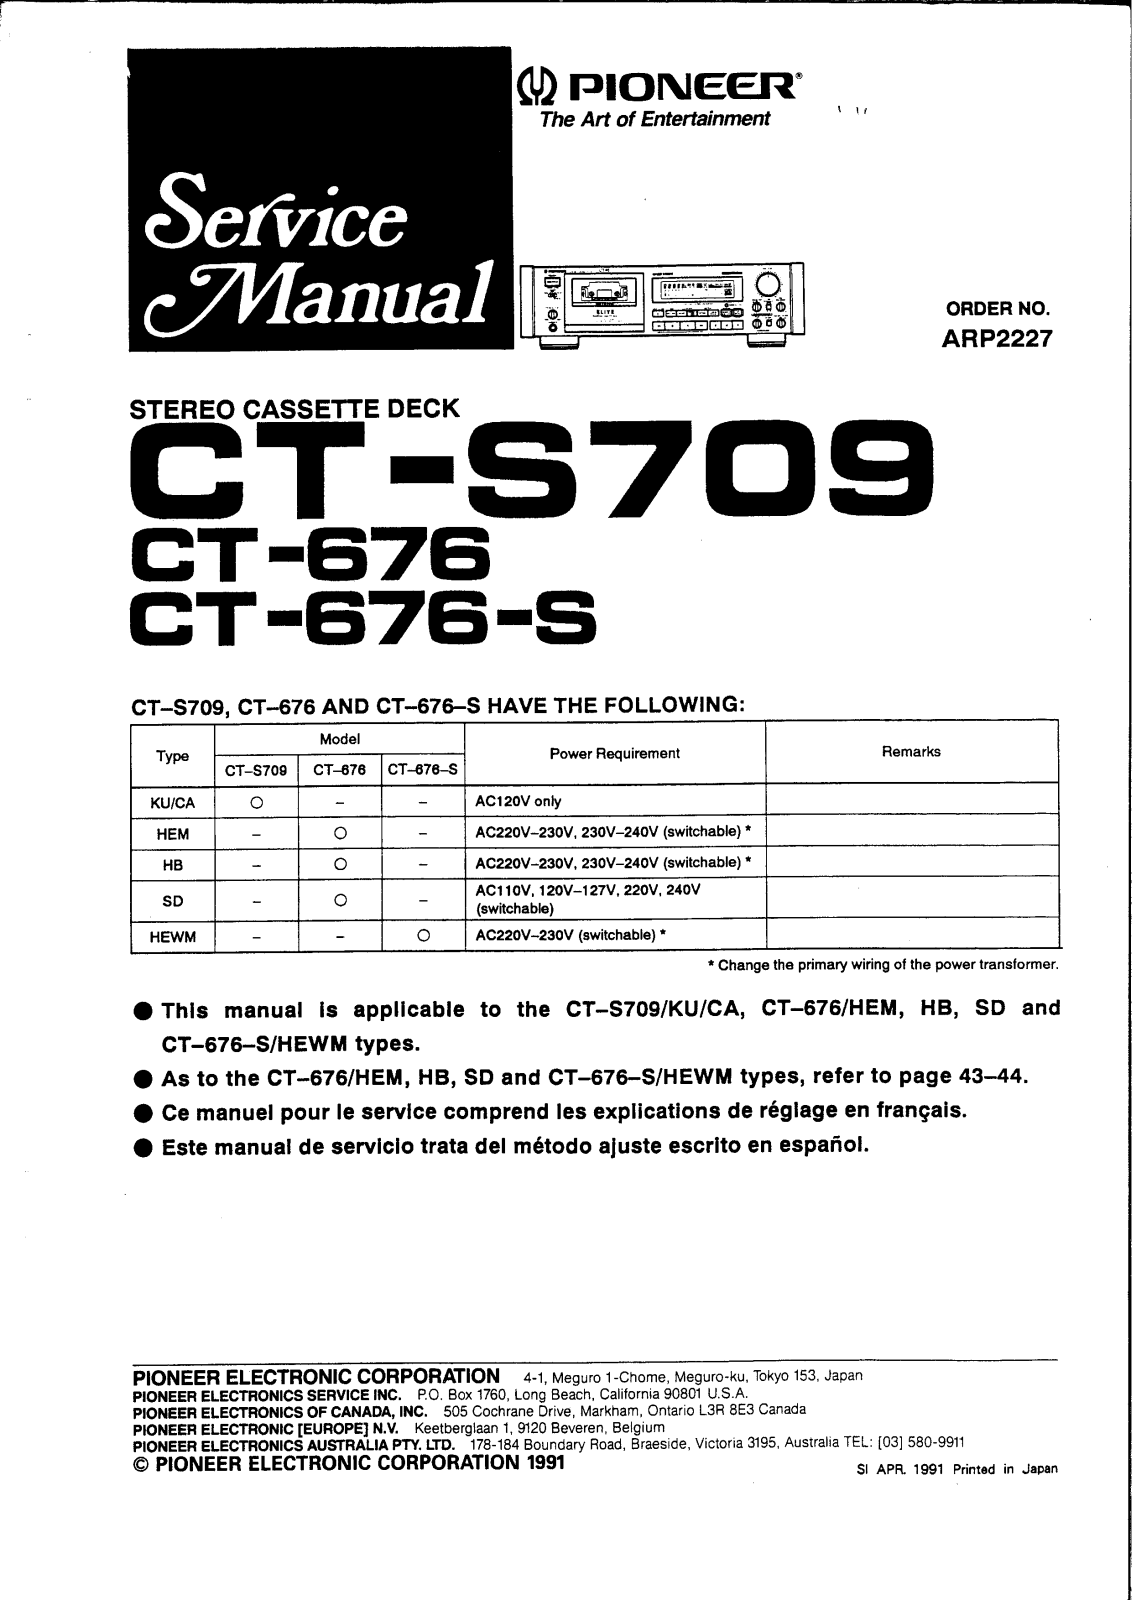 Pioneer CT-676, CT-676-S, CTS-709 Service manual